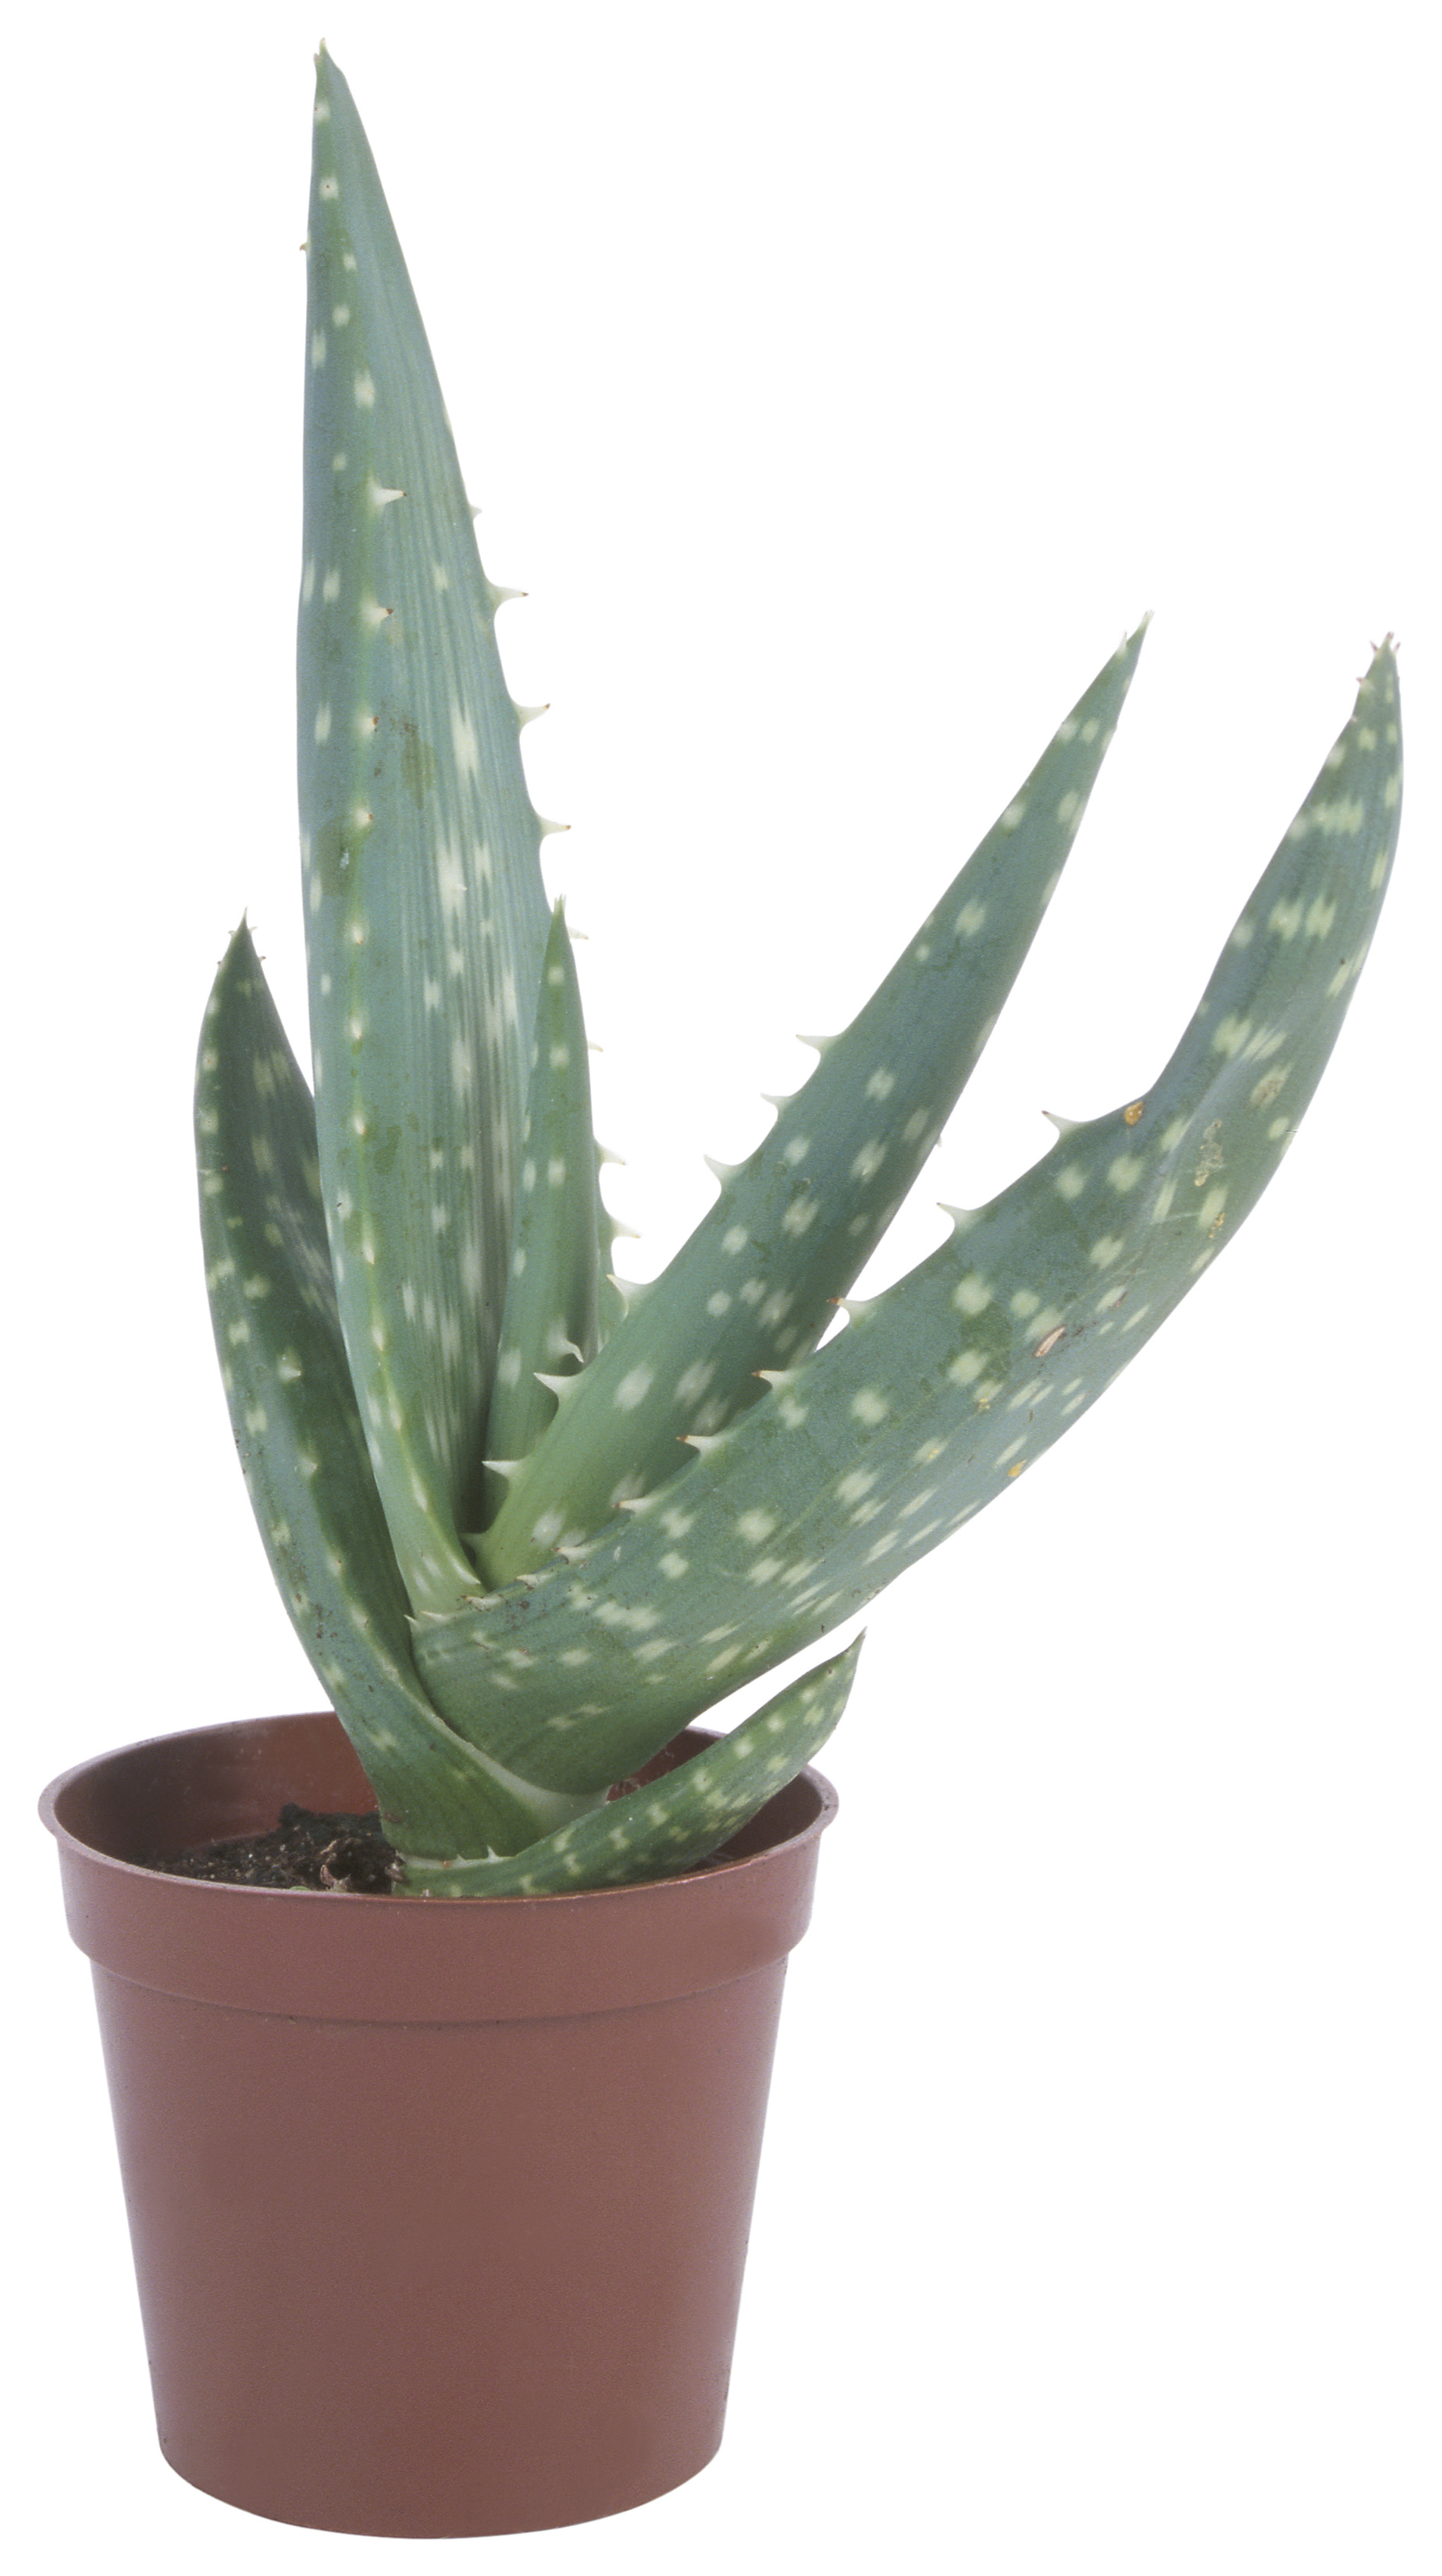 Why Is My Aloe Vera Plant Turning Brown? | Home Guides | SF Gate